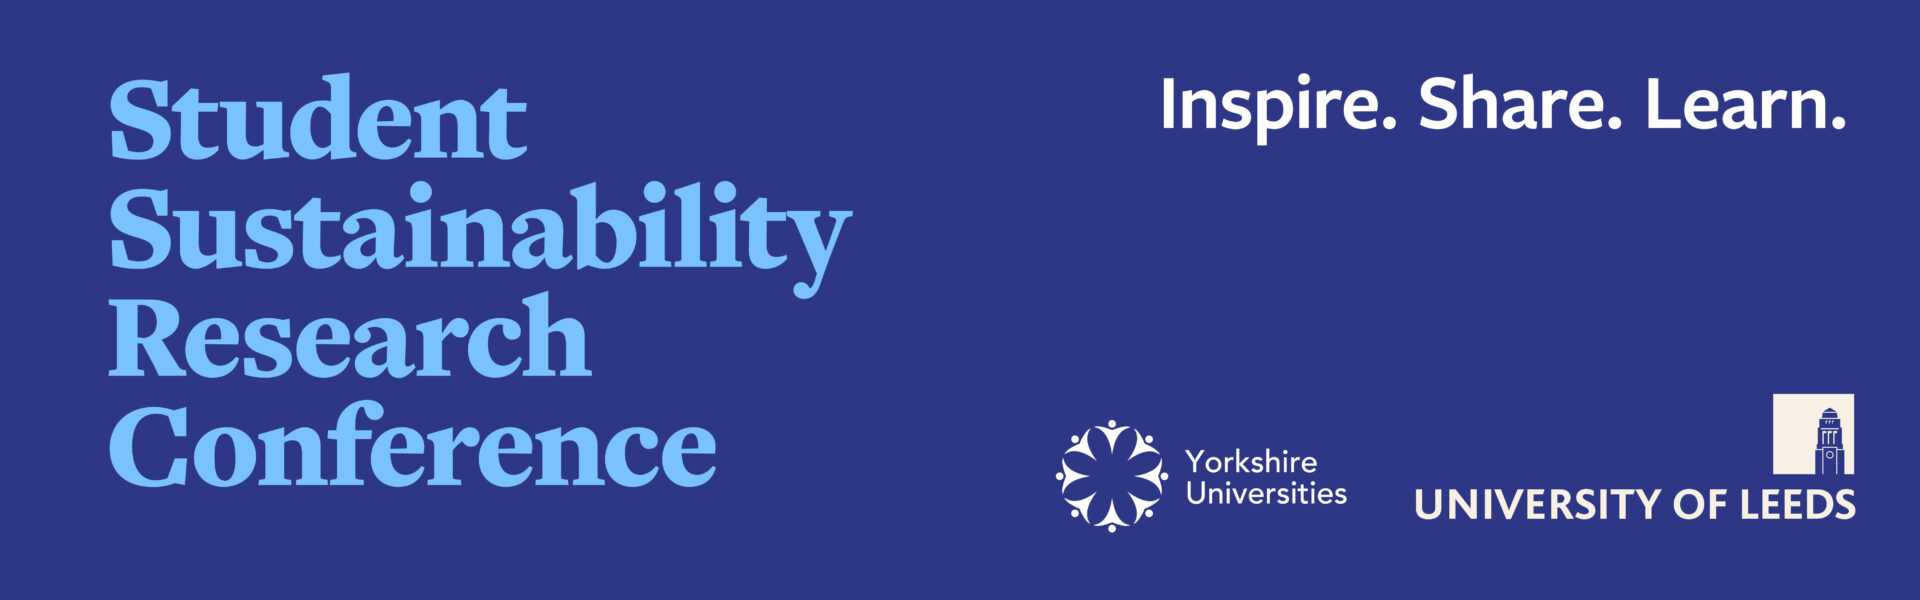 Dark blue banner with the words 'Student Sustainability Research Conference', 'Inspire, Share, Learn' and the logos of Yorkshire Universities and the University of Leeds.